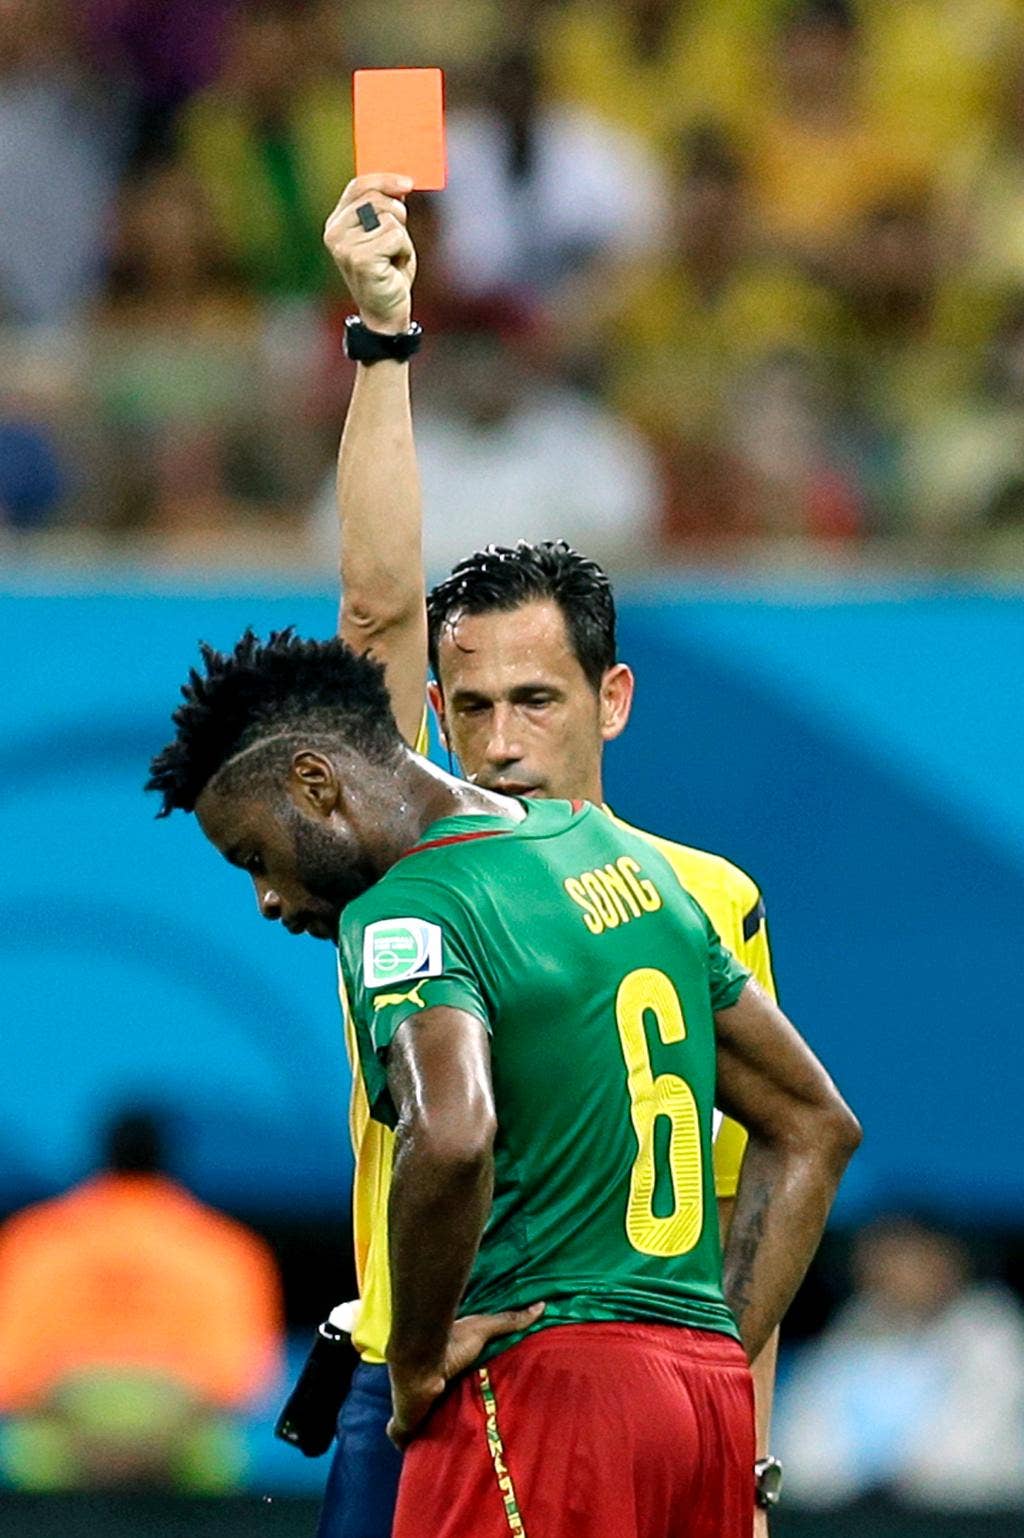 With infighting and inexplicable red card, Cameroon eliminated from